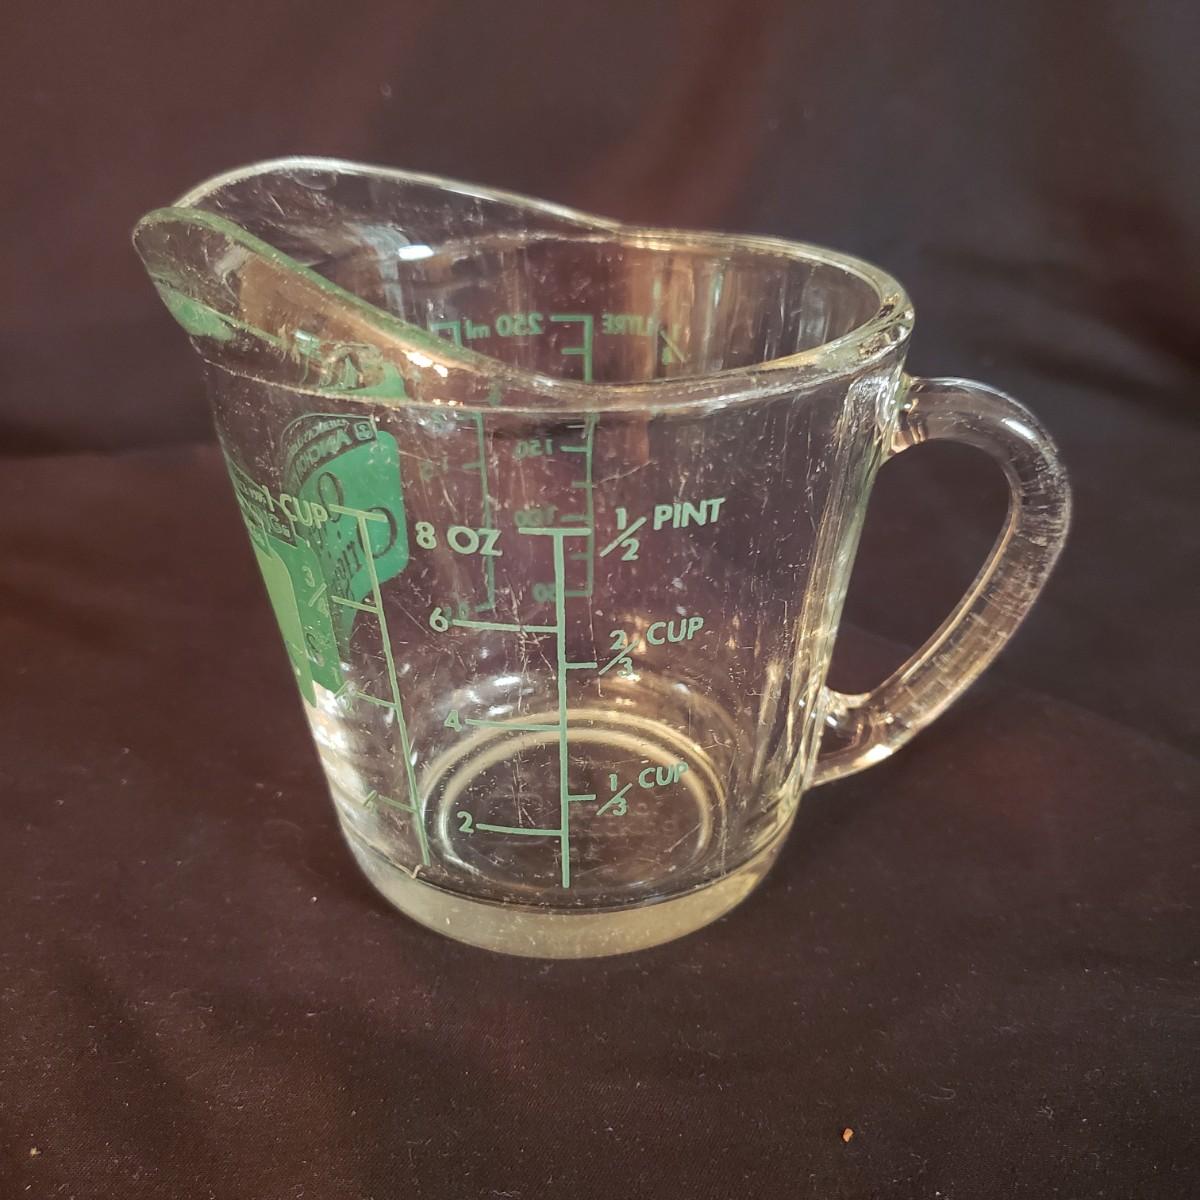 Sold at Auction: 2- PYREX GLASS MEASURING CUPS